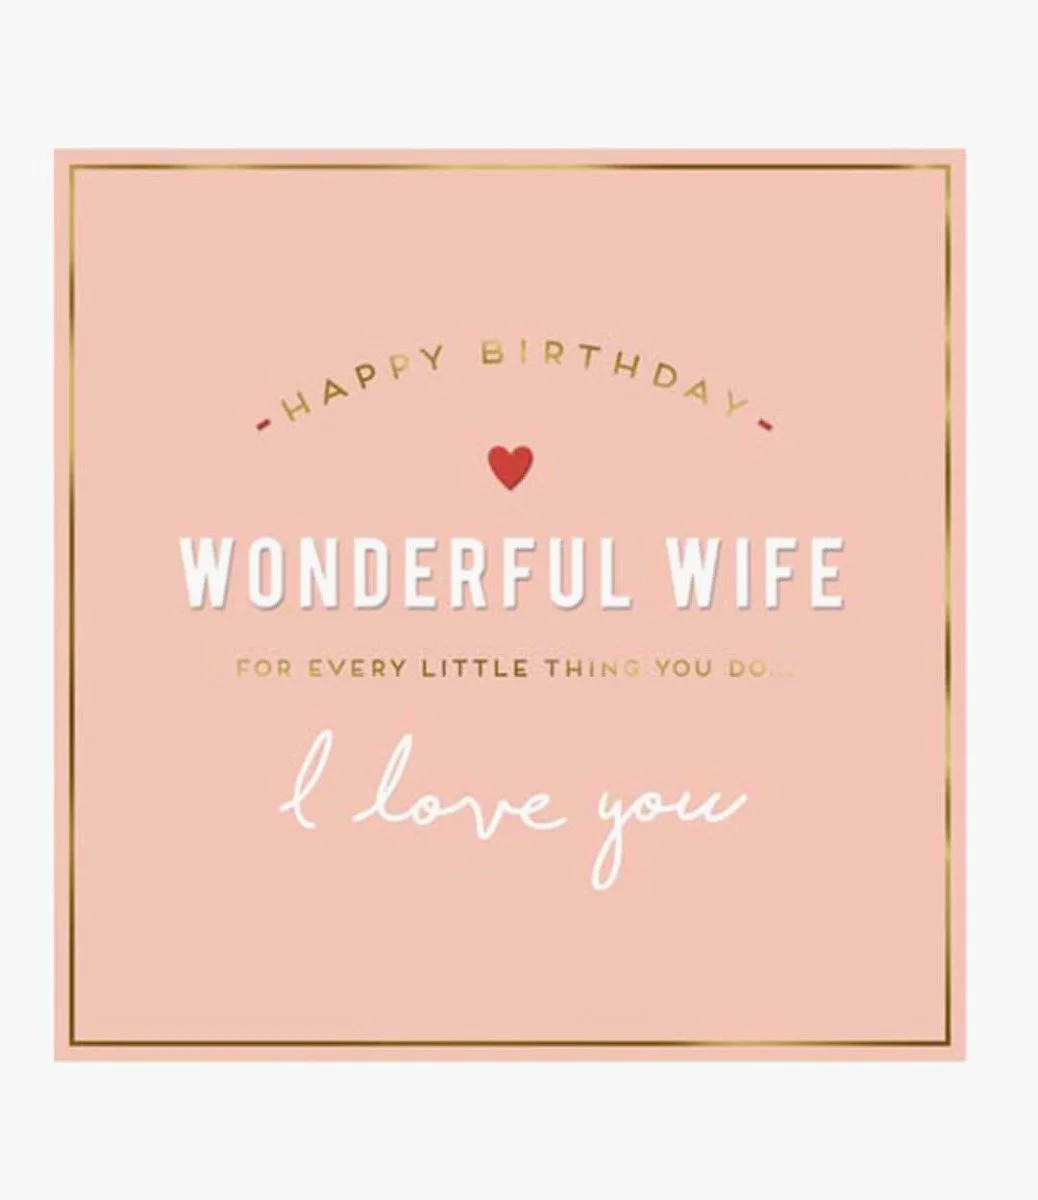 Wonderful Wife Every Little Thing Greeting Card by Alice Scott